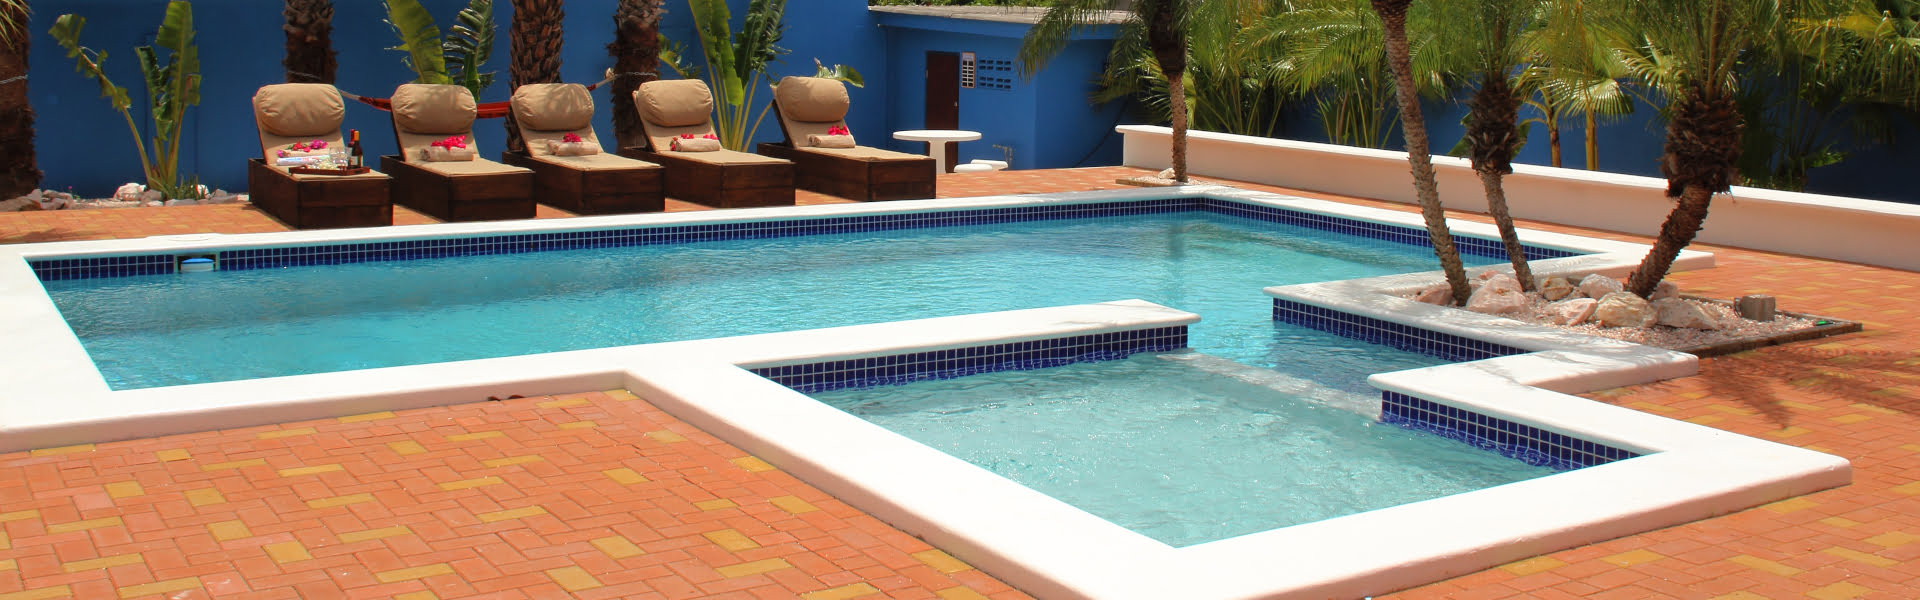 Rent a holiday home Curacao with a children's pool